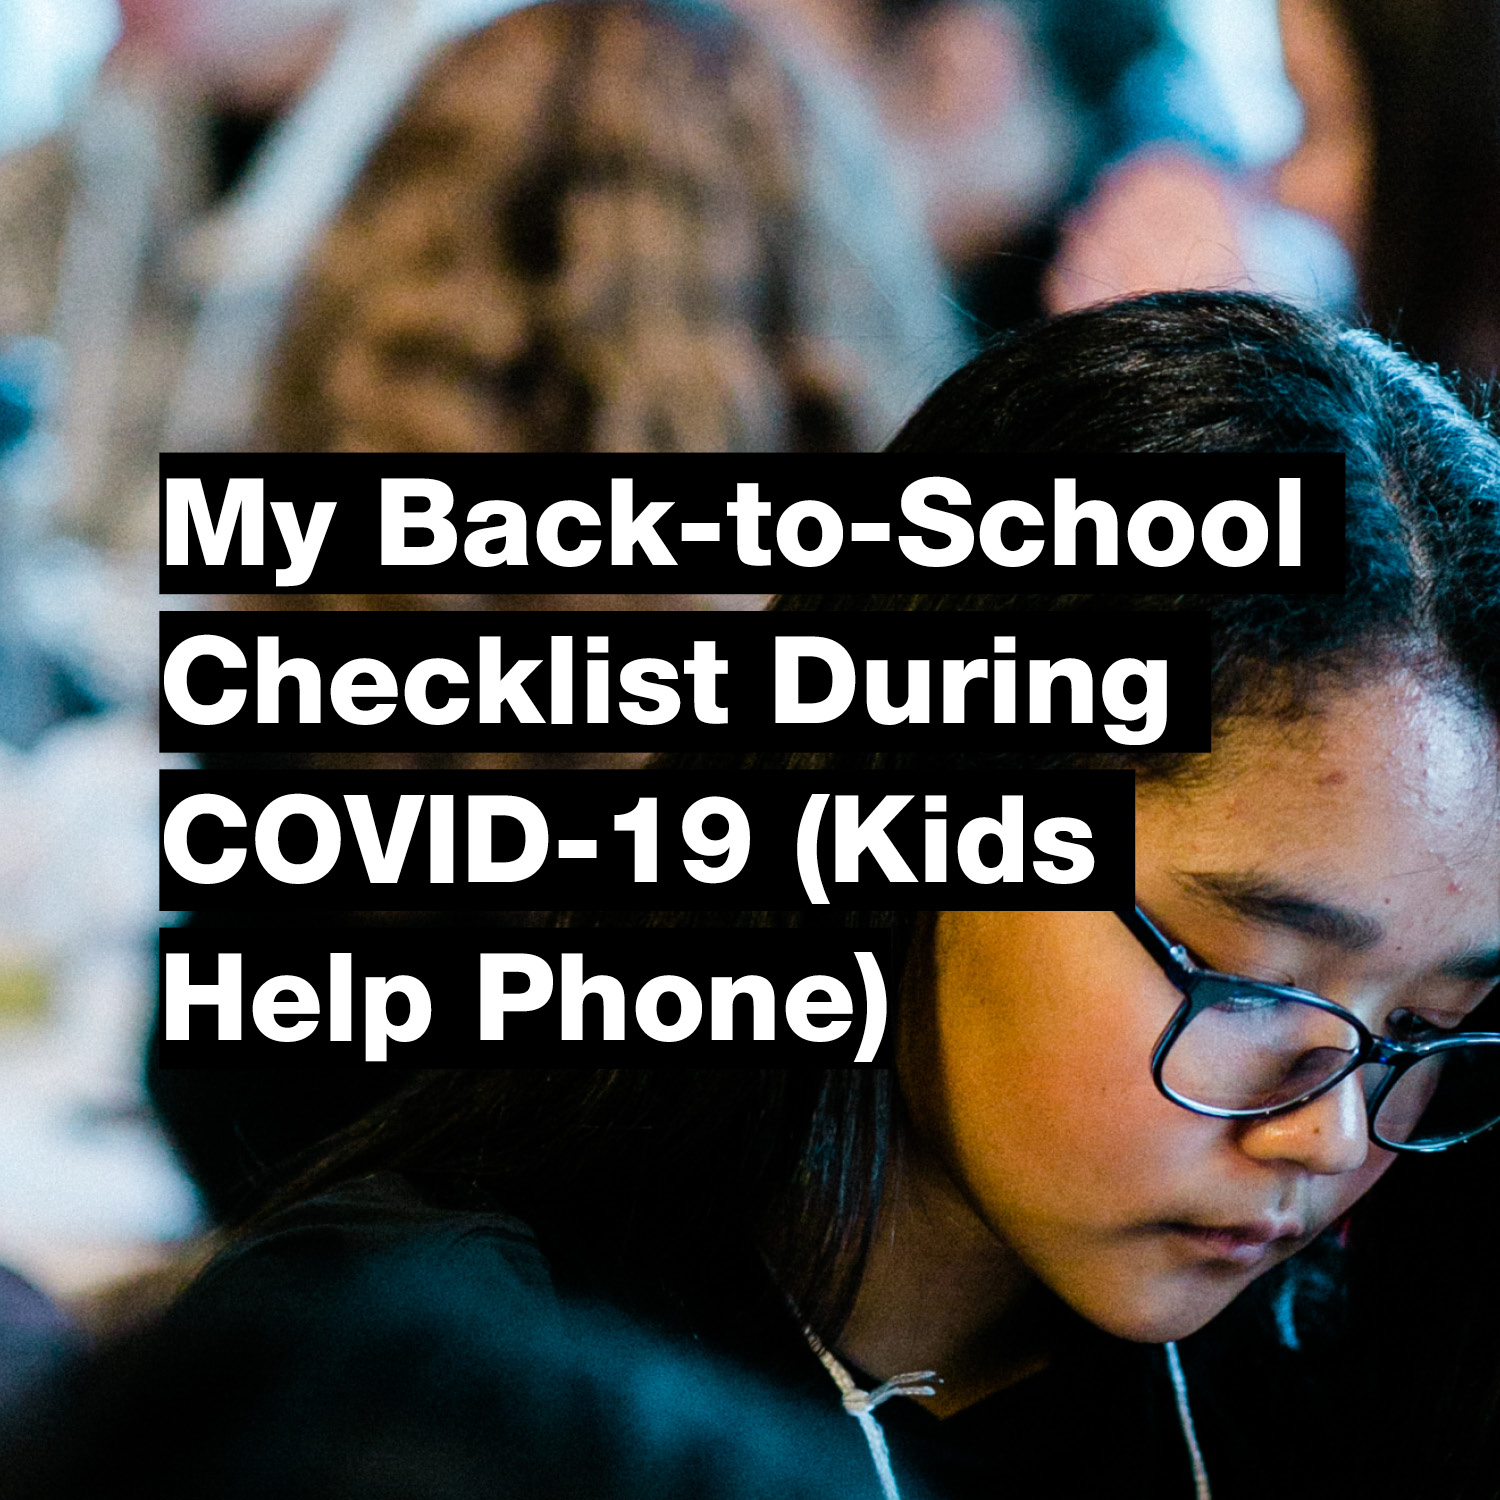 My Back-to-School Checklist During COVID-19